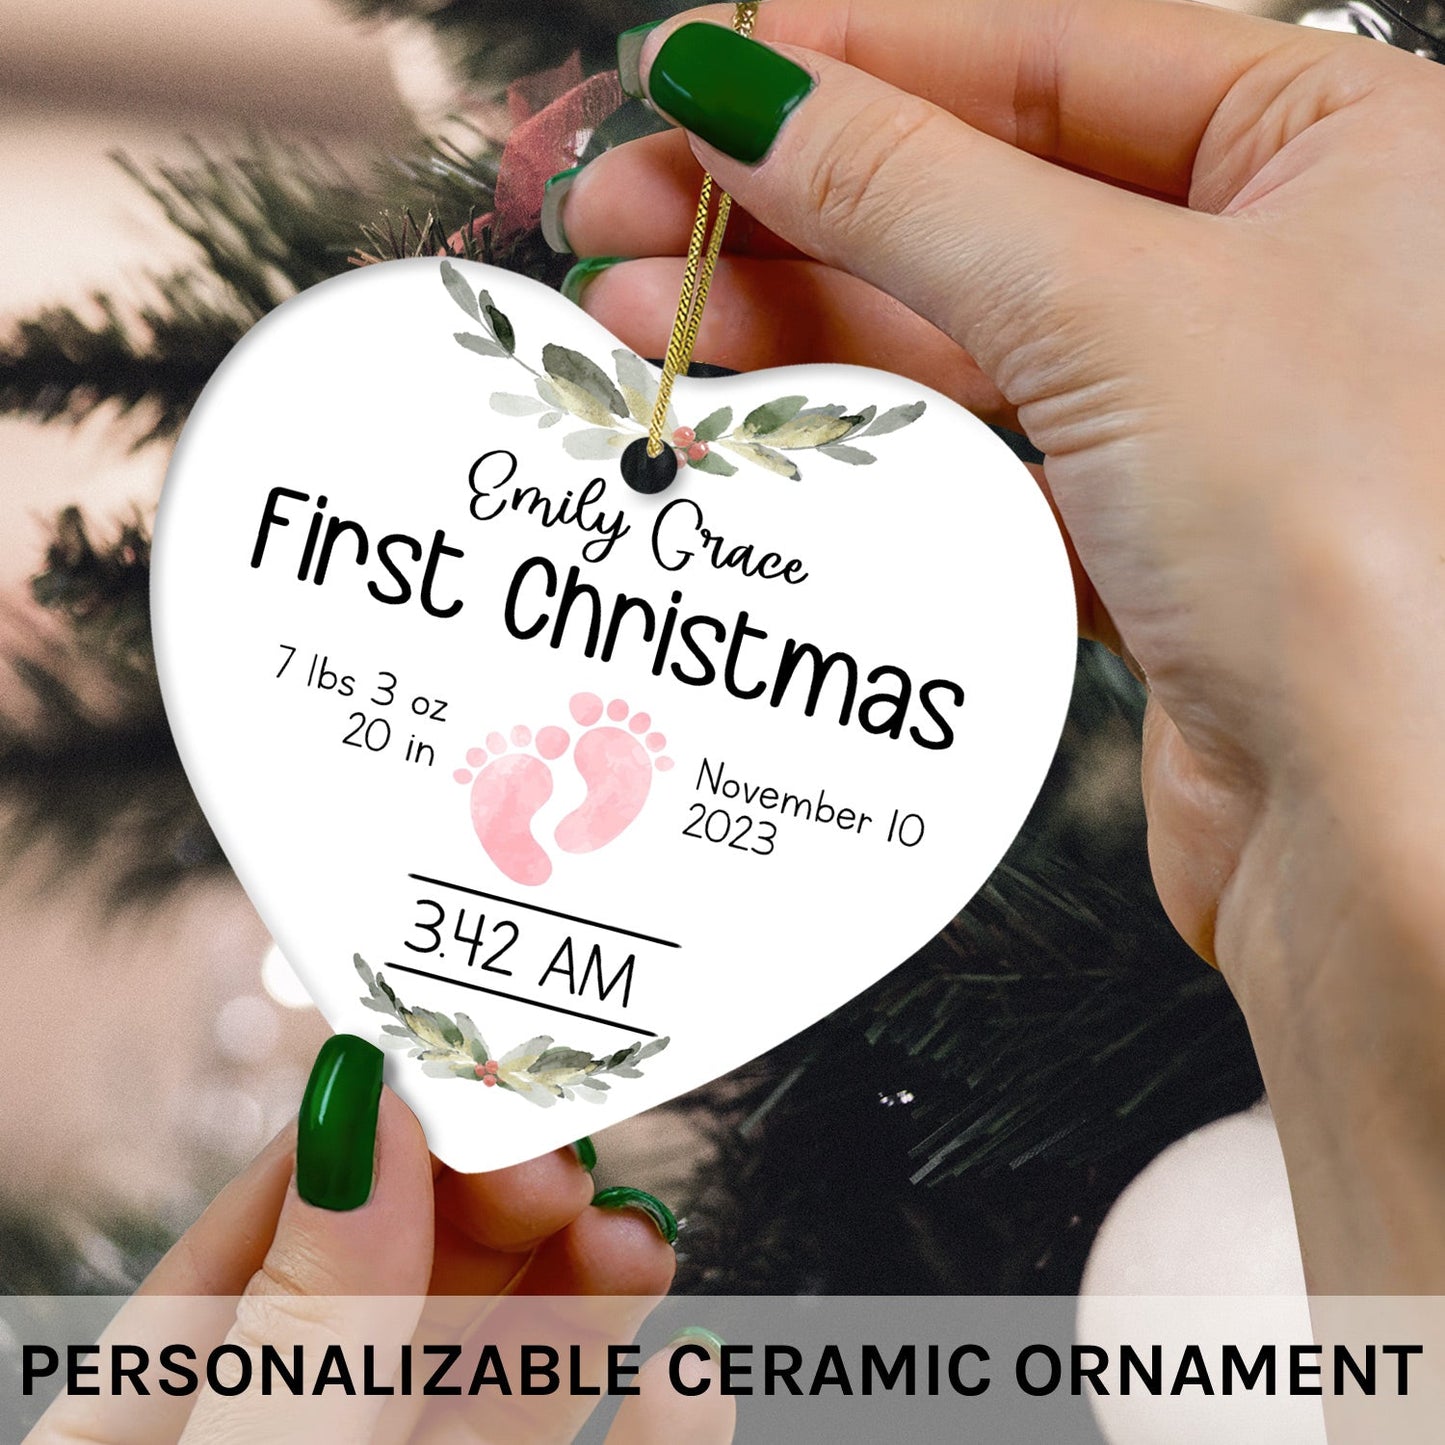 Newborn Birth Stats - Personalized First Christmas gift for Baby - Custom Heart Ceramic Ornament - MyMindfulGifts